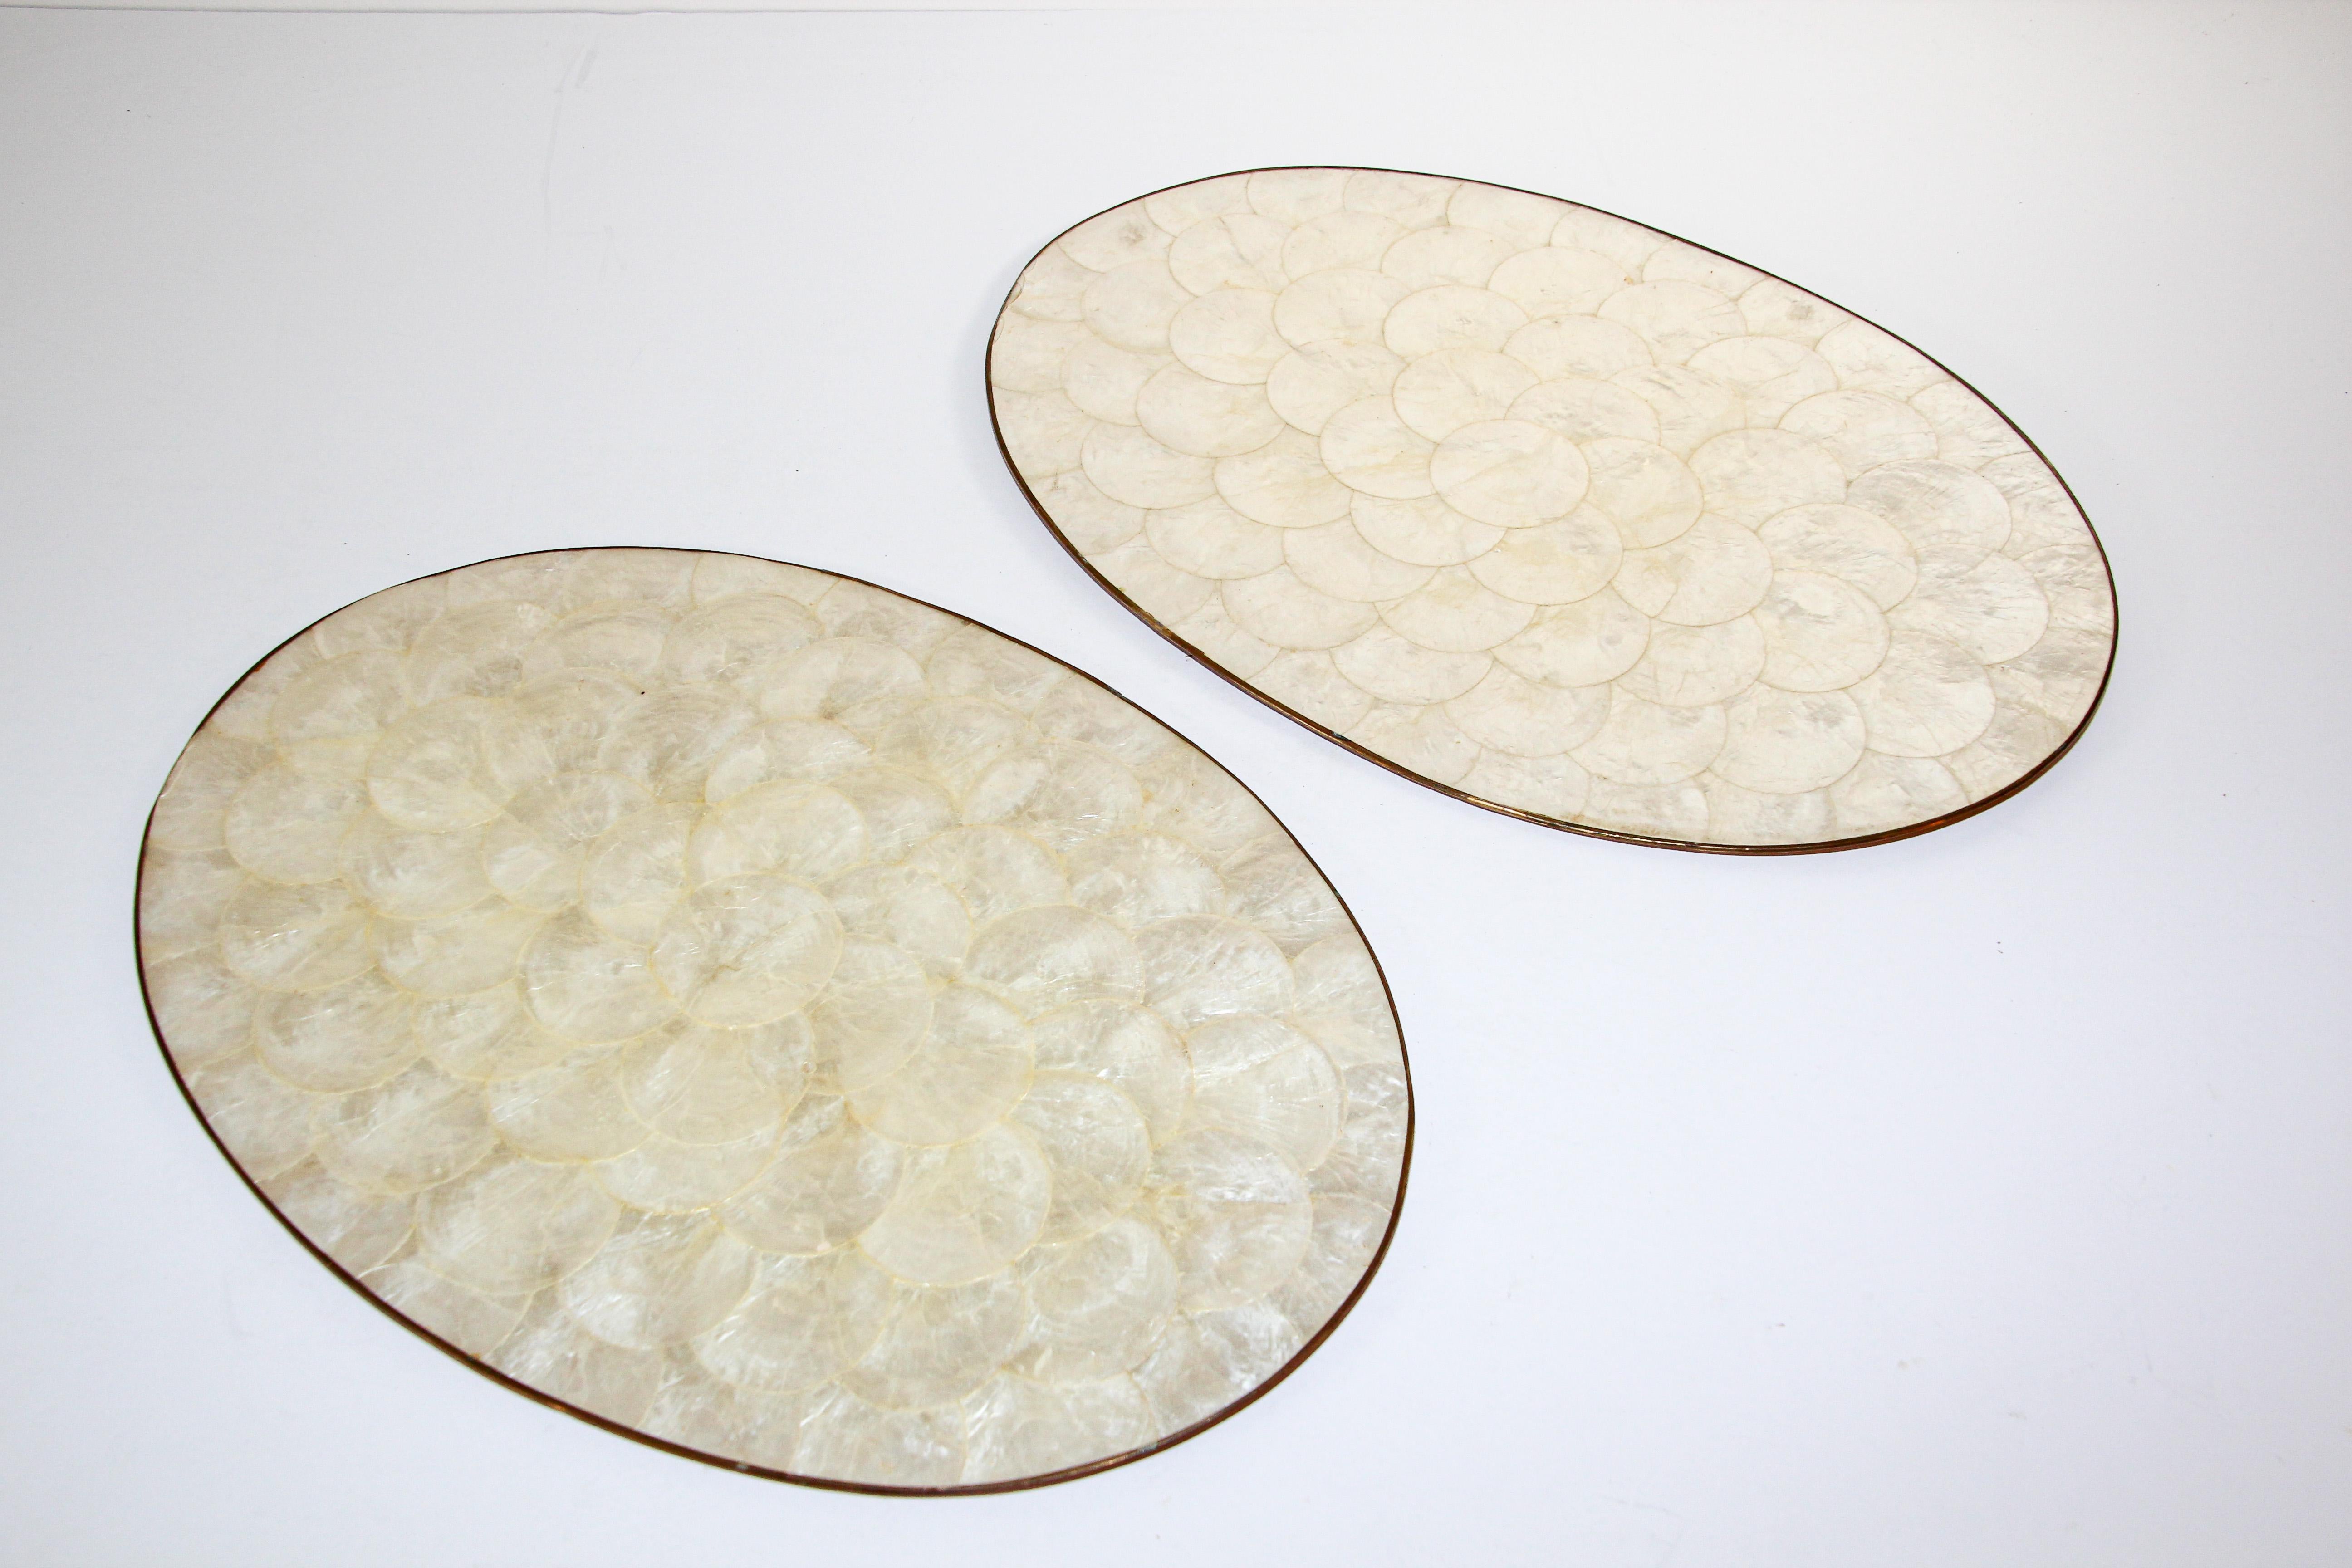 Vintage Hallie St Mary placemats, set of two capiz, abalone, pearl shell design oval placemats with brass rim.
Luminous, beautiful mother of pearl shell color.
The reverse of these placemats is cork. 
These would make a beautiful, tropical and